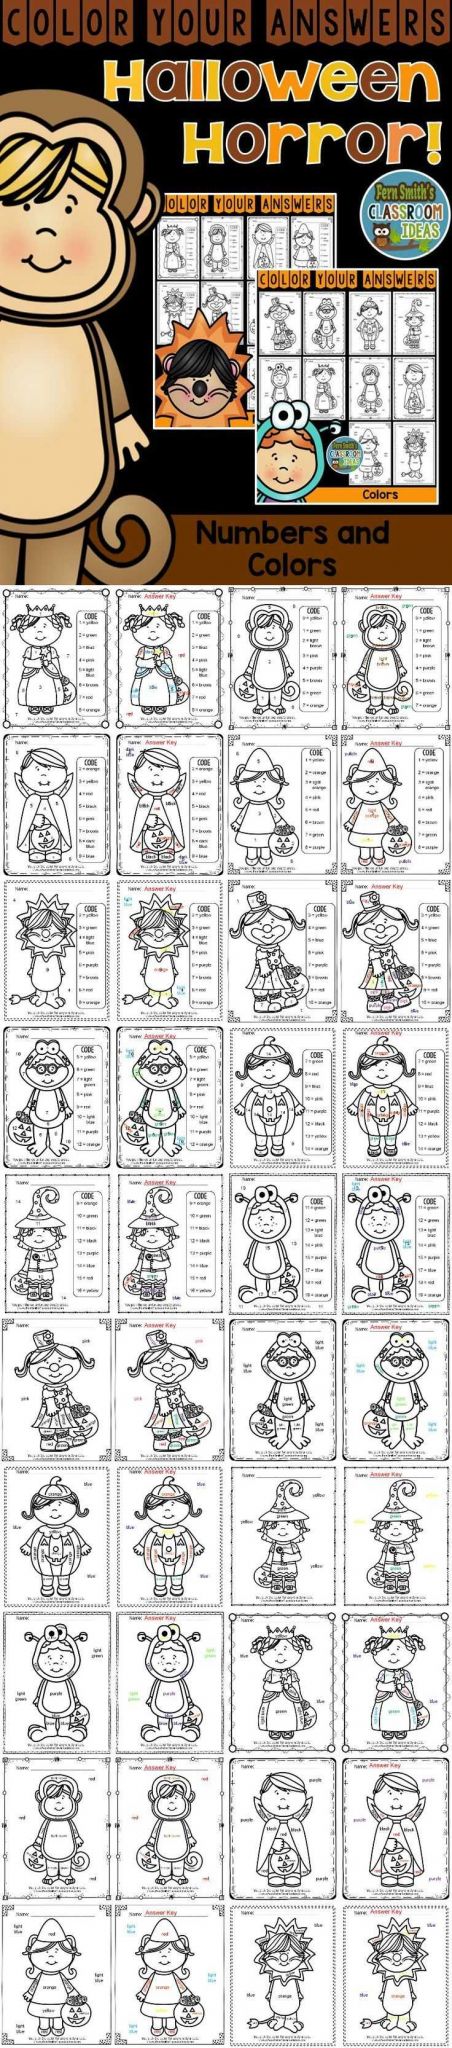 The Haunted History Of Halloween Worksheet Answers Also 182 Best Halloween Images On Pinterest